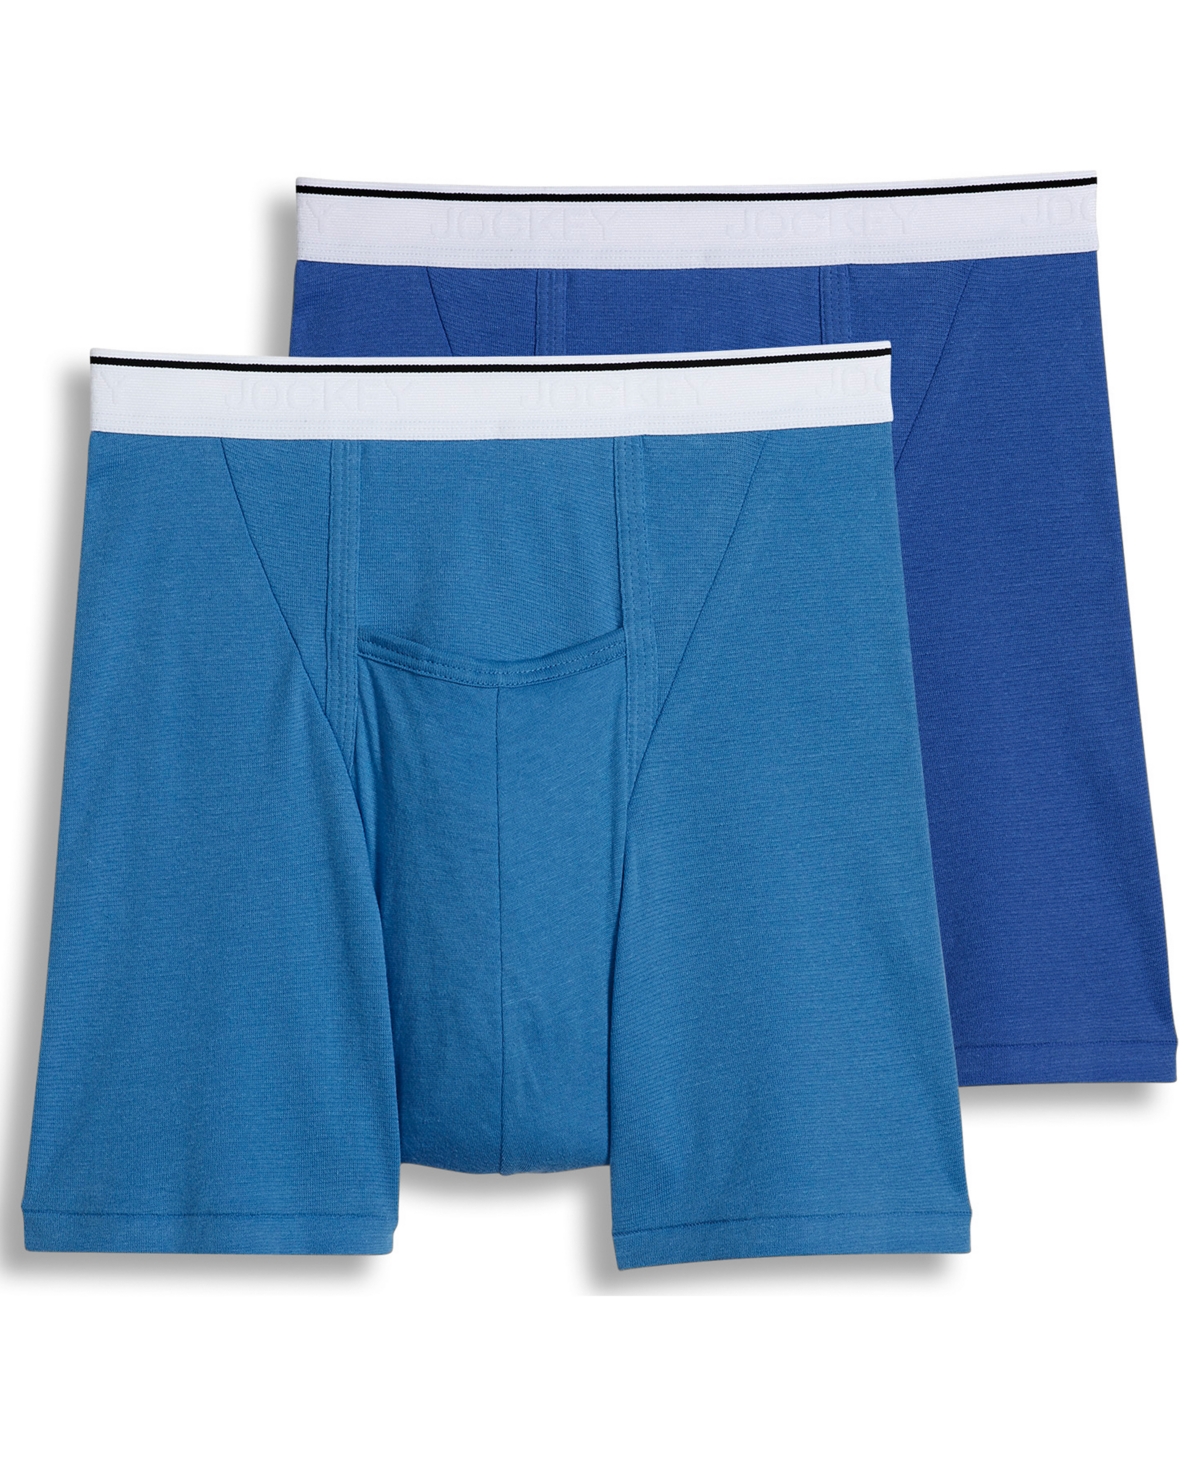 Jockey Men's Pouch Boxer Briefs 2-pack In Blue Spring,just Blue